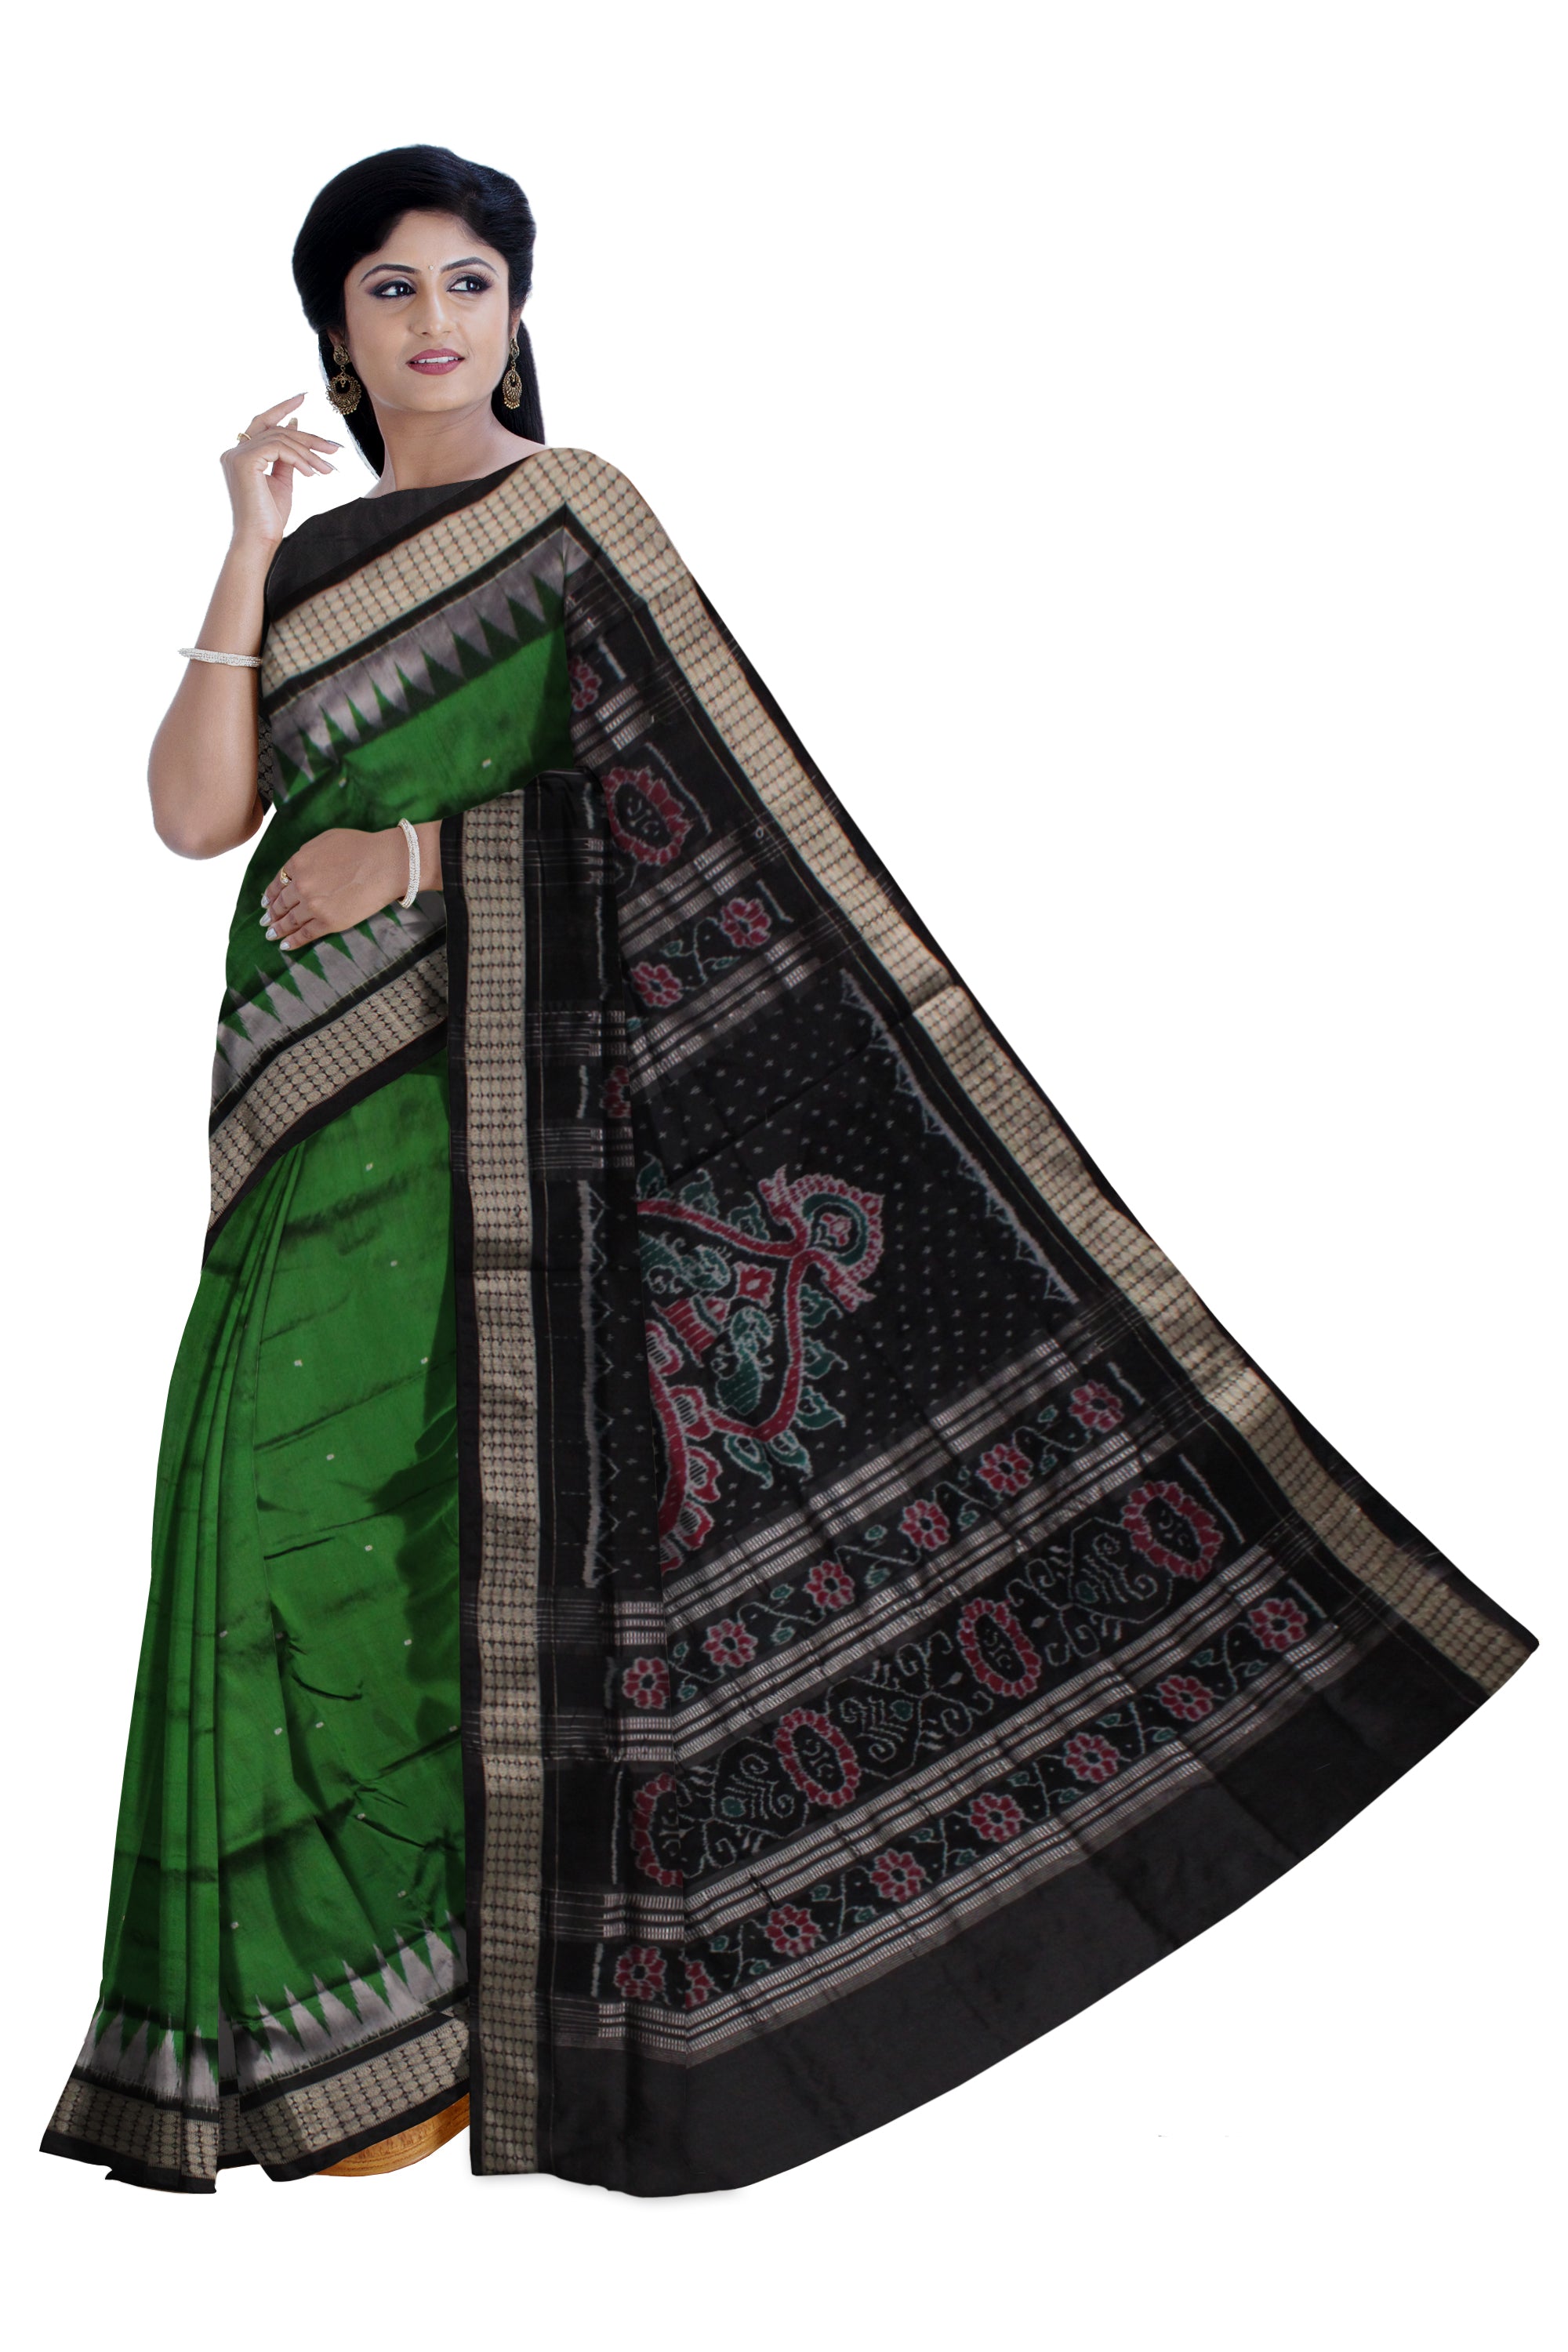 SMALL BOOTY PATTERN PATA SAREE IS GREEN AND BLACK COLOR BASE,COMES WITH MATCHING BLOUSE PIECE. - Koshali Arts & Crafts Enterprise